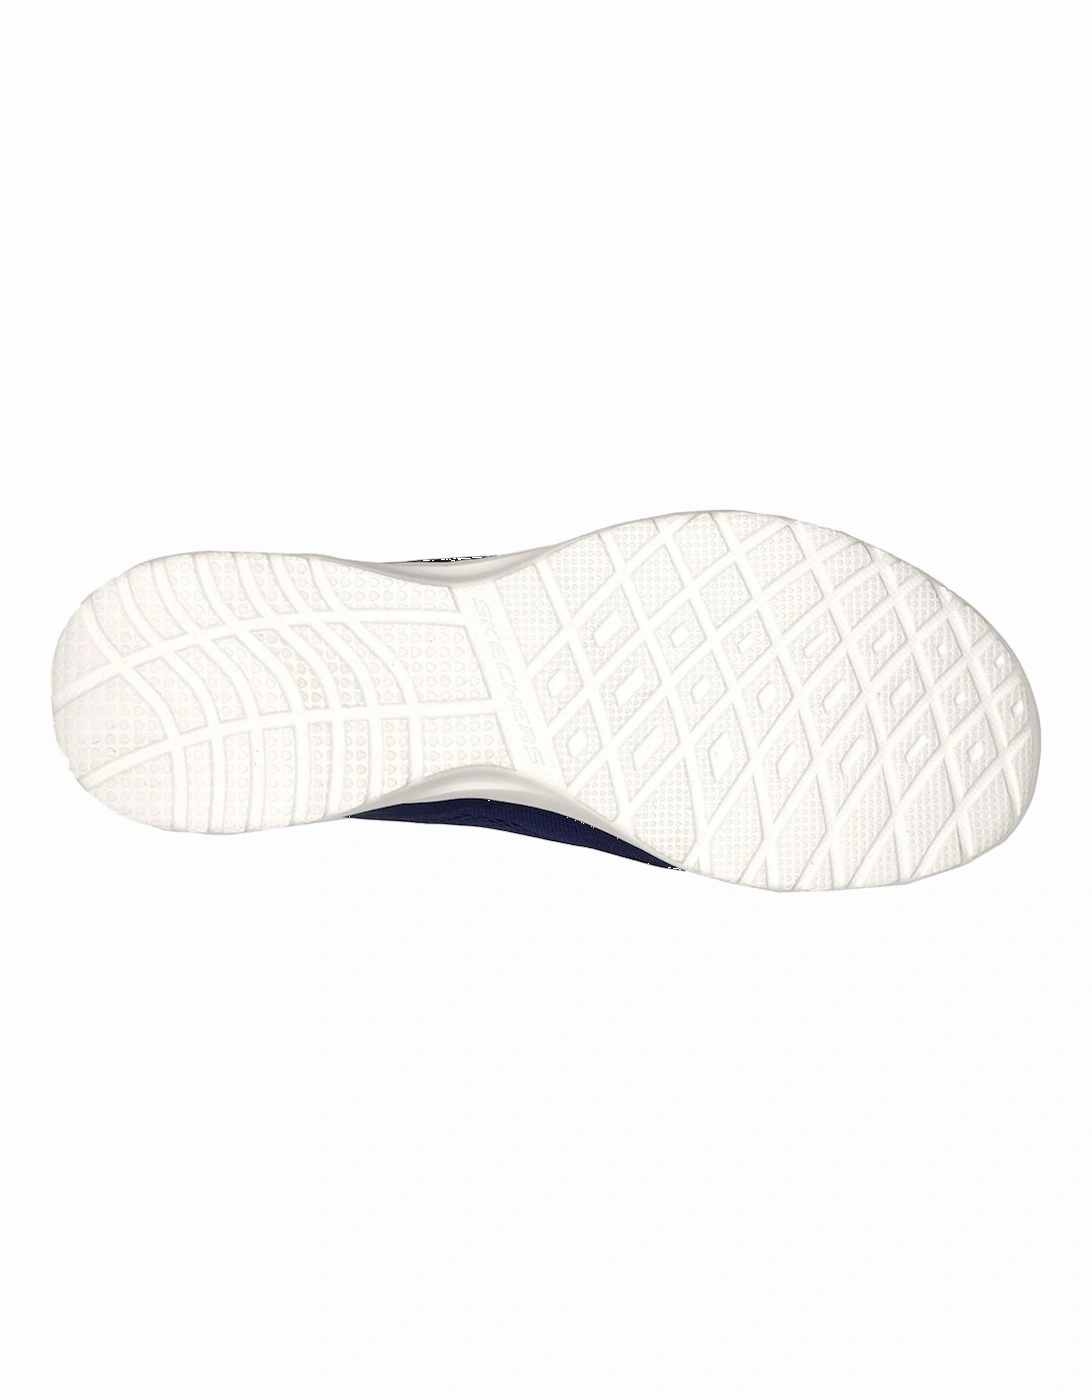 Skech-Air Dynamight NG Womens Trainers